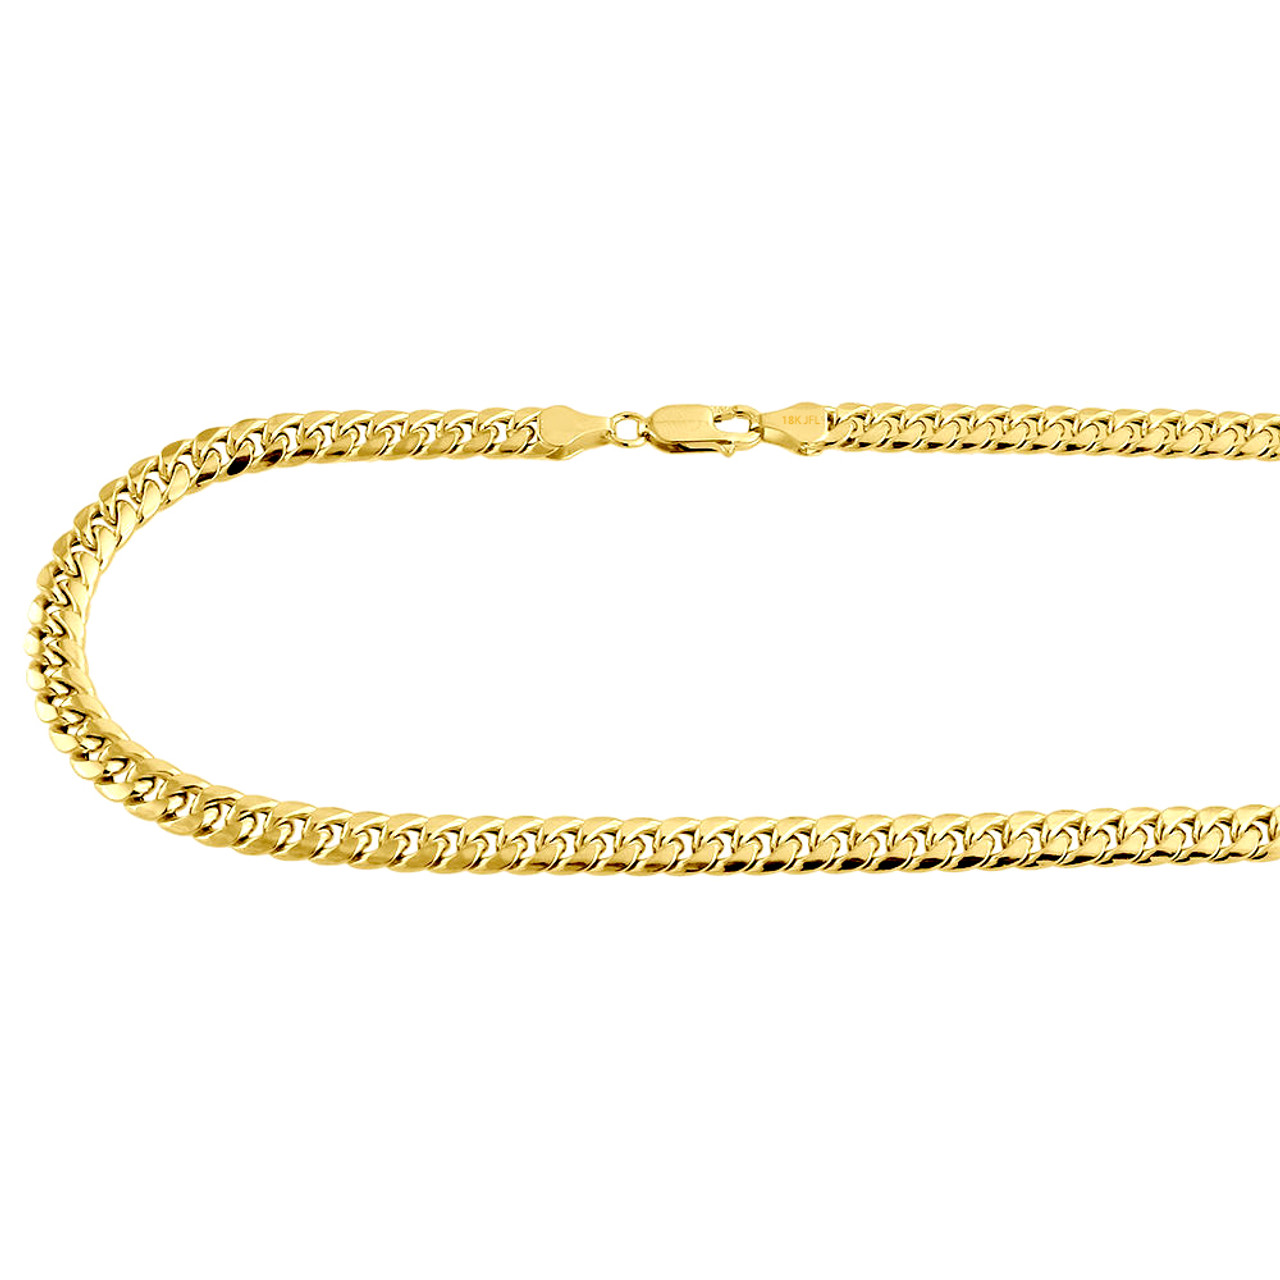 Modern Men's Solid 14k Yellow Gold 6.22 mm Curb Link Chain 24 Necklac